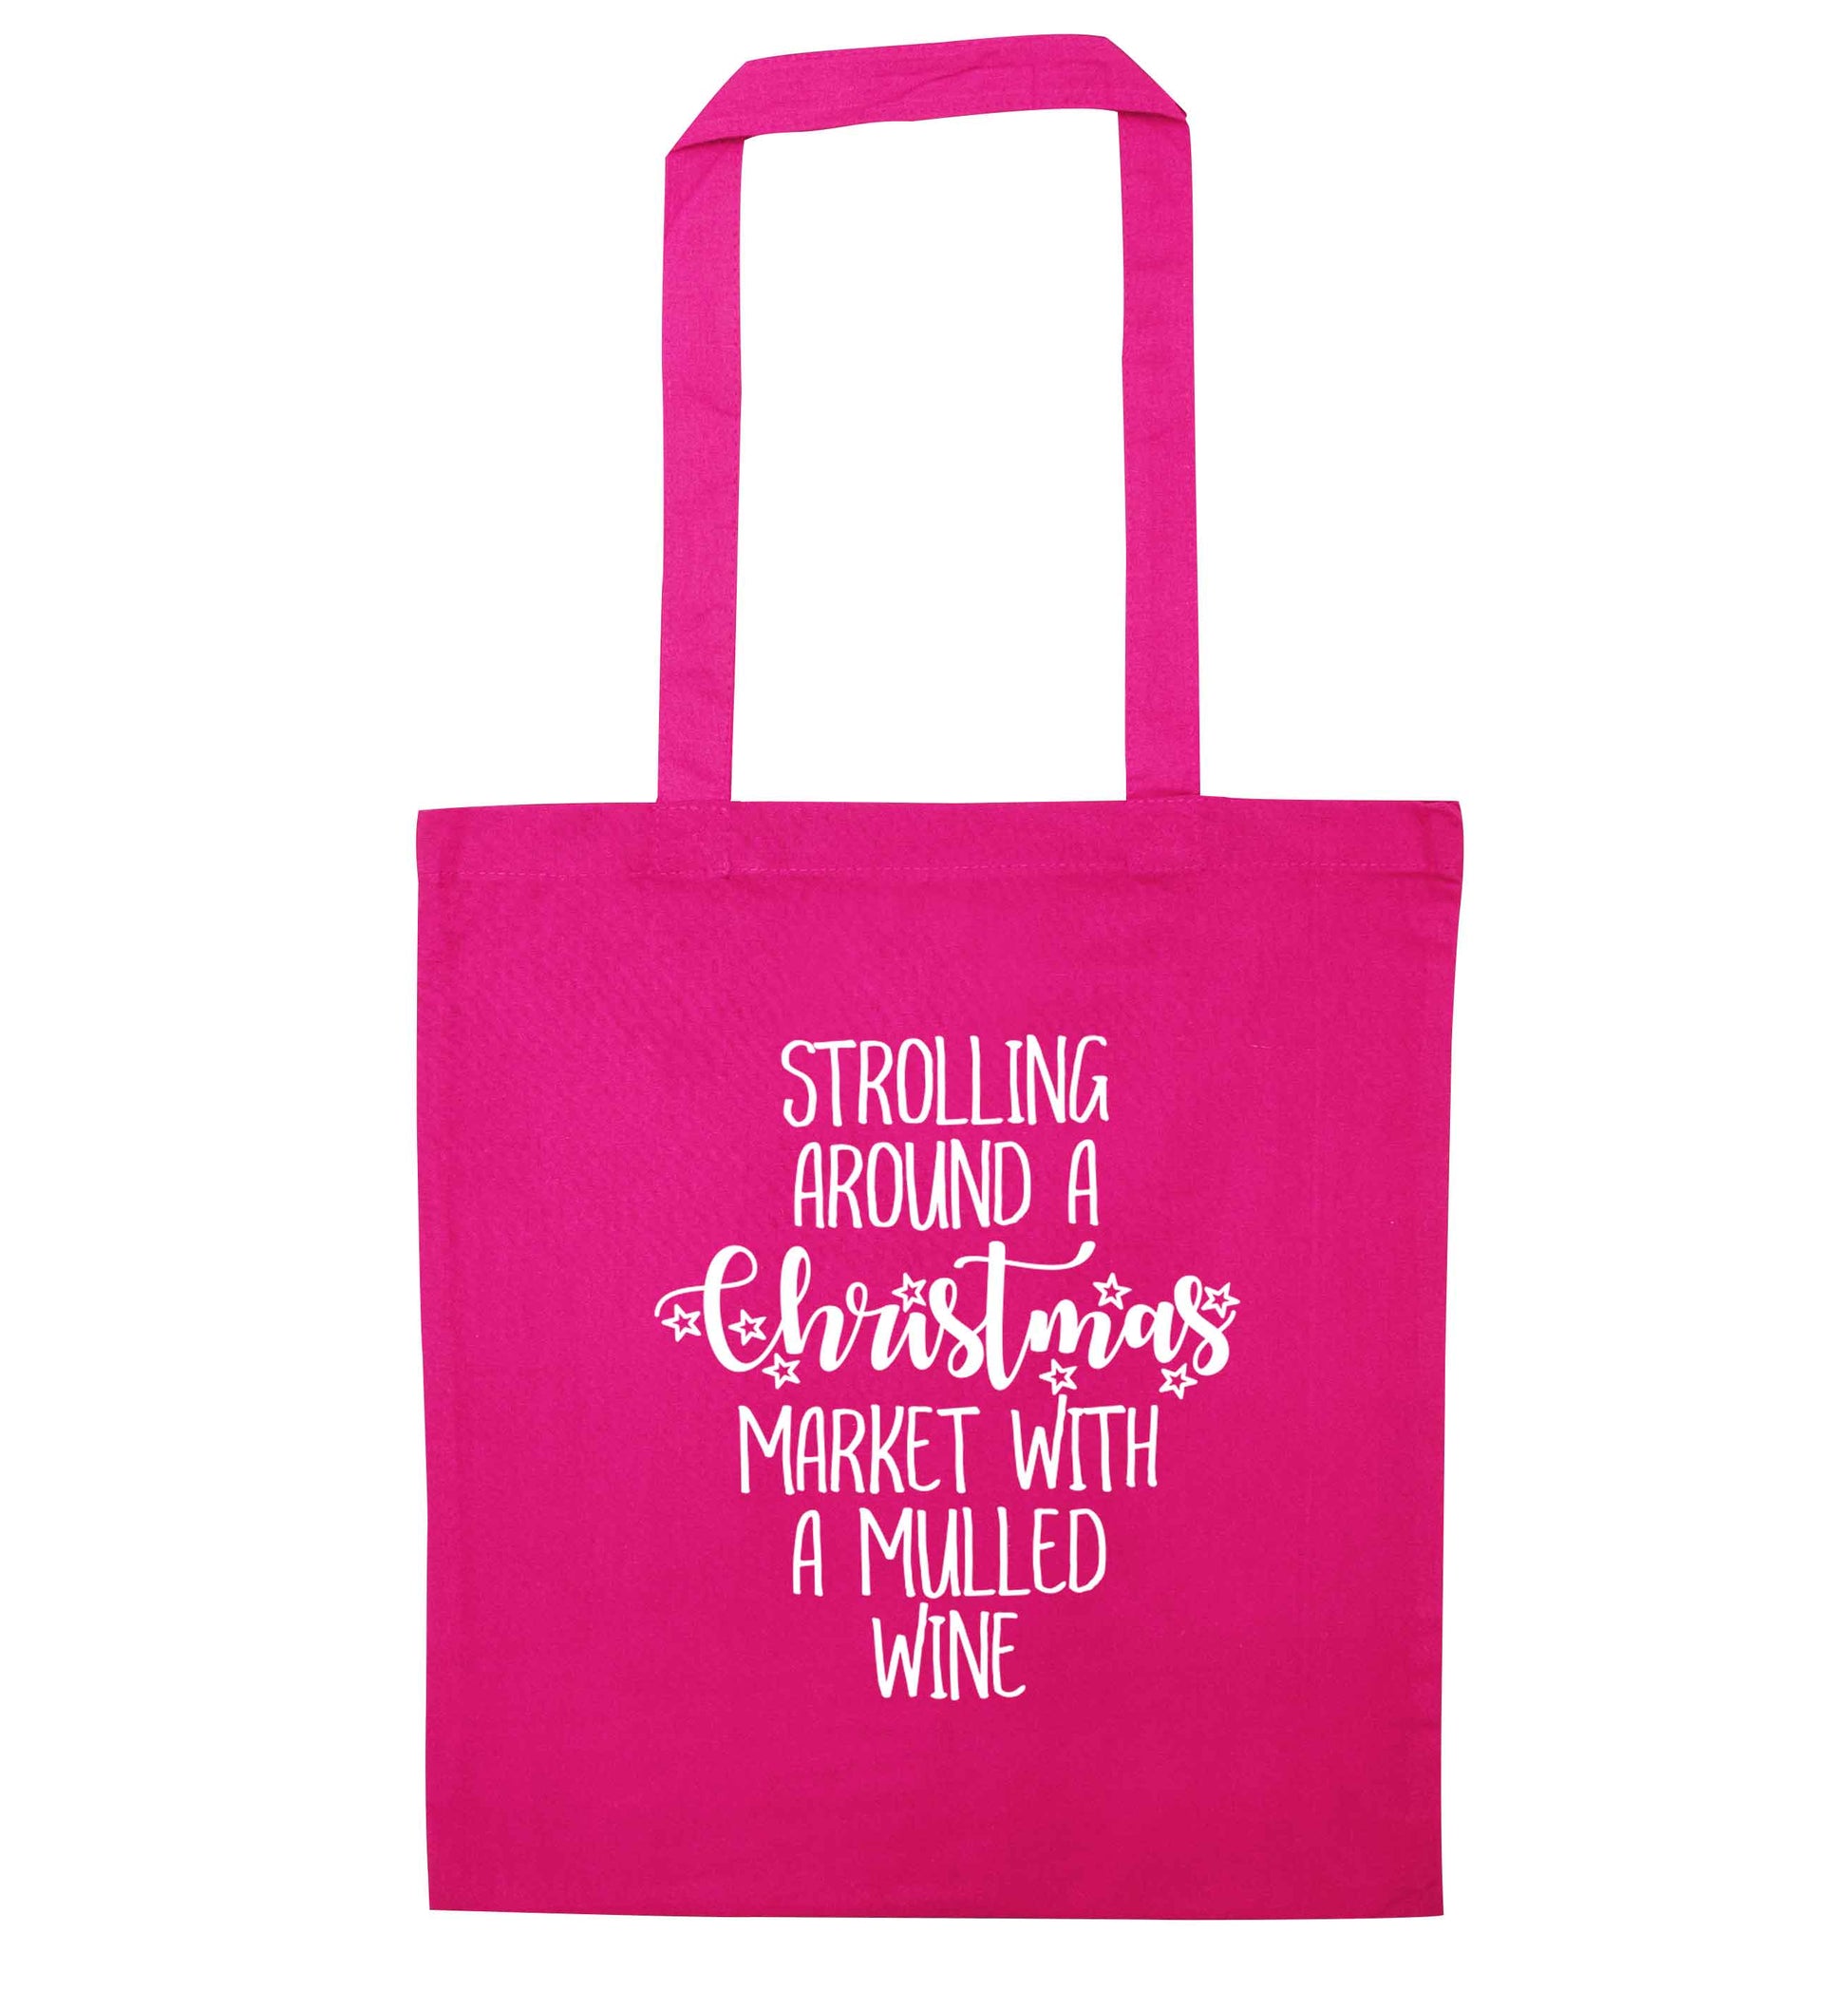 Strolling around a Christmas market with mulled wine pink tote bag